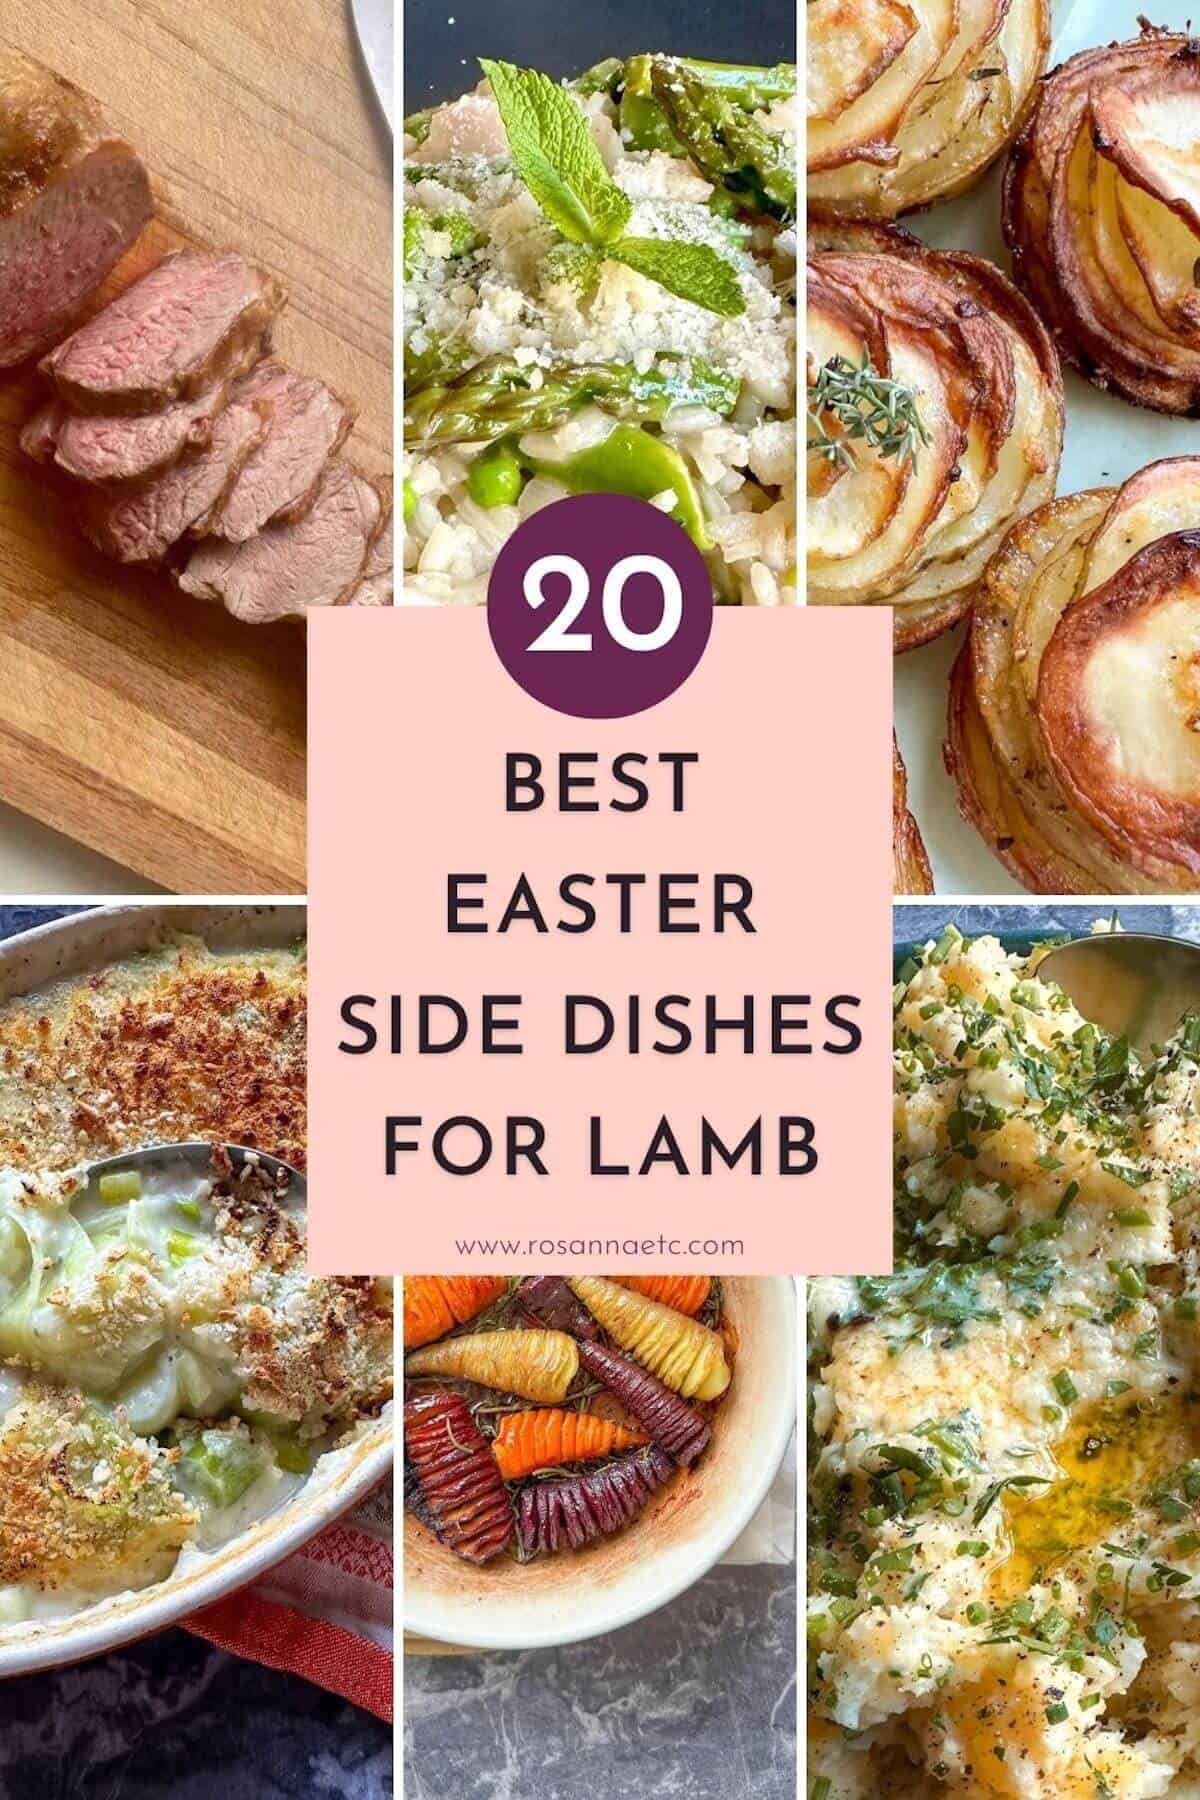 Best Easter side dishes for lamb collage.